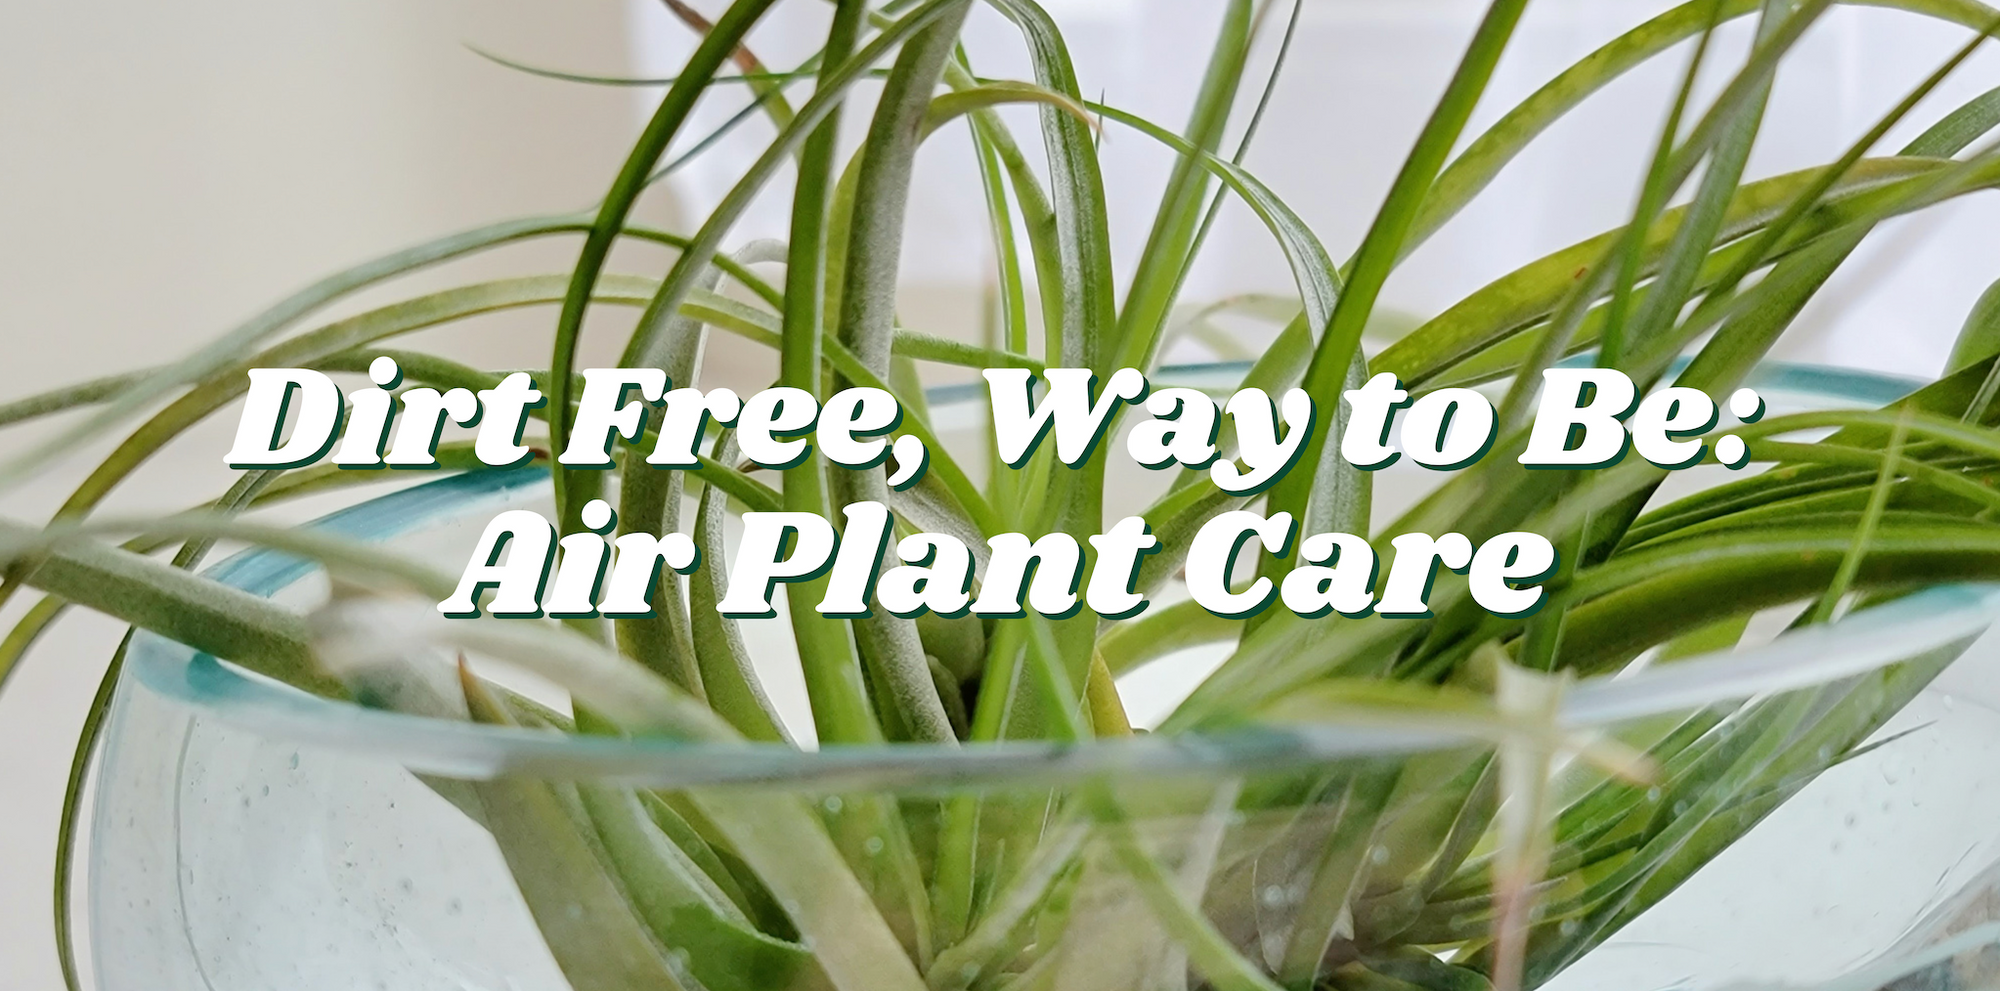 Dirt Free, Way to Be: Air Plant Care